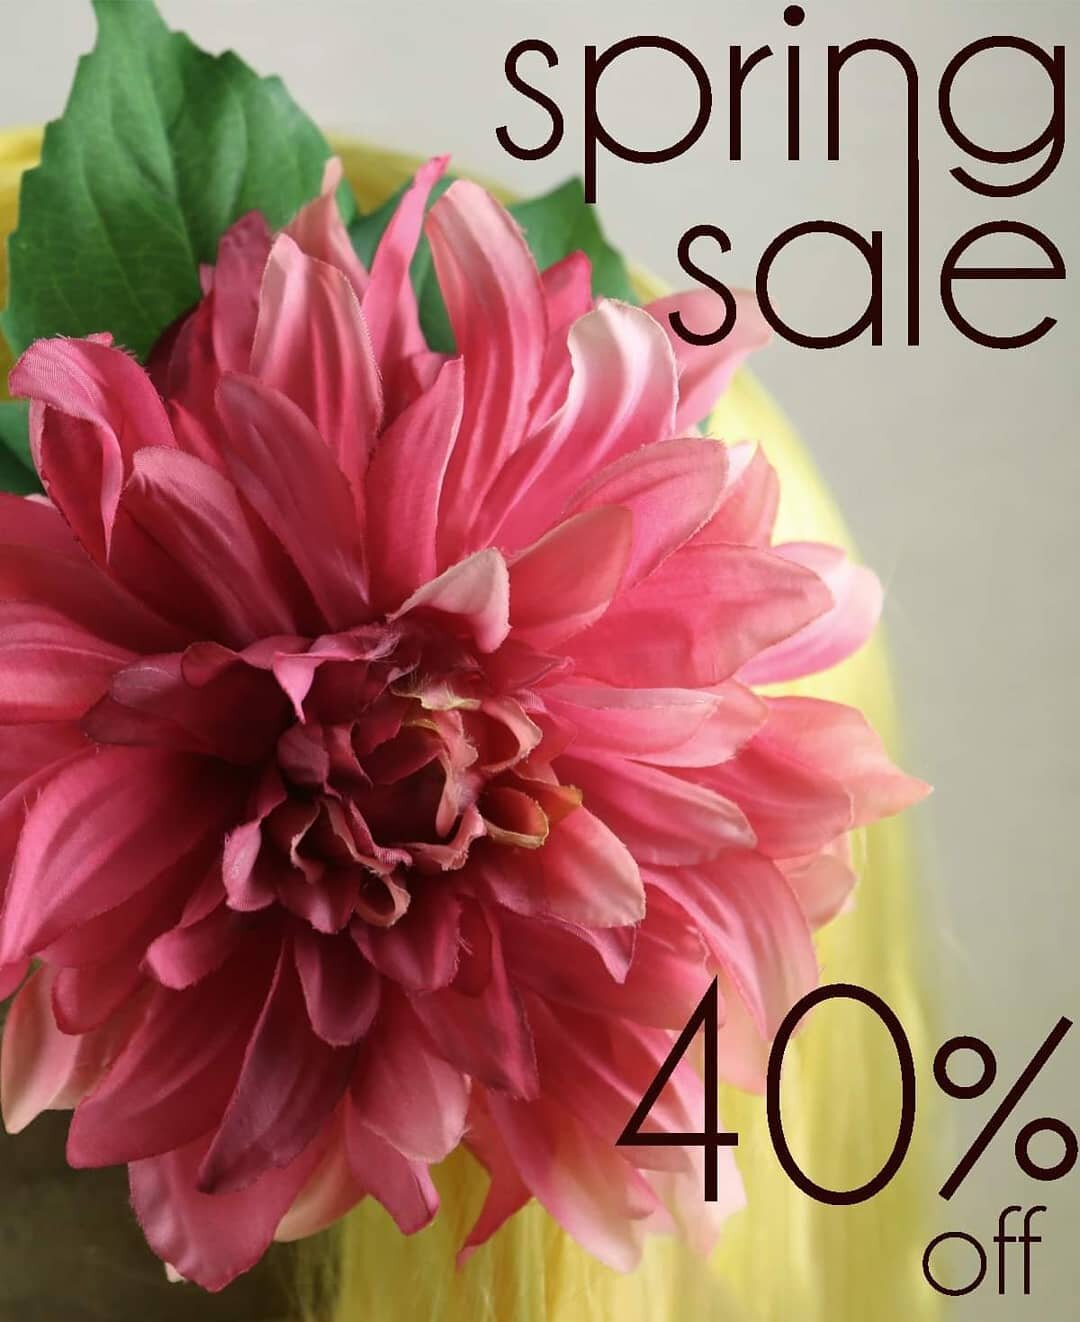 Spring for your hair....now 40% off!
Each one is unique, ethically made and hand crafted! 
#pinuphair #retro #accessories #flowersinherhair #fresh #springhair #pinupgirl #hairclip #boho #floral